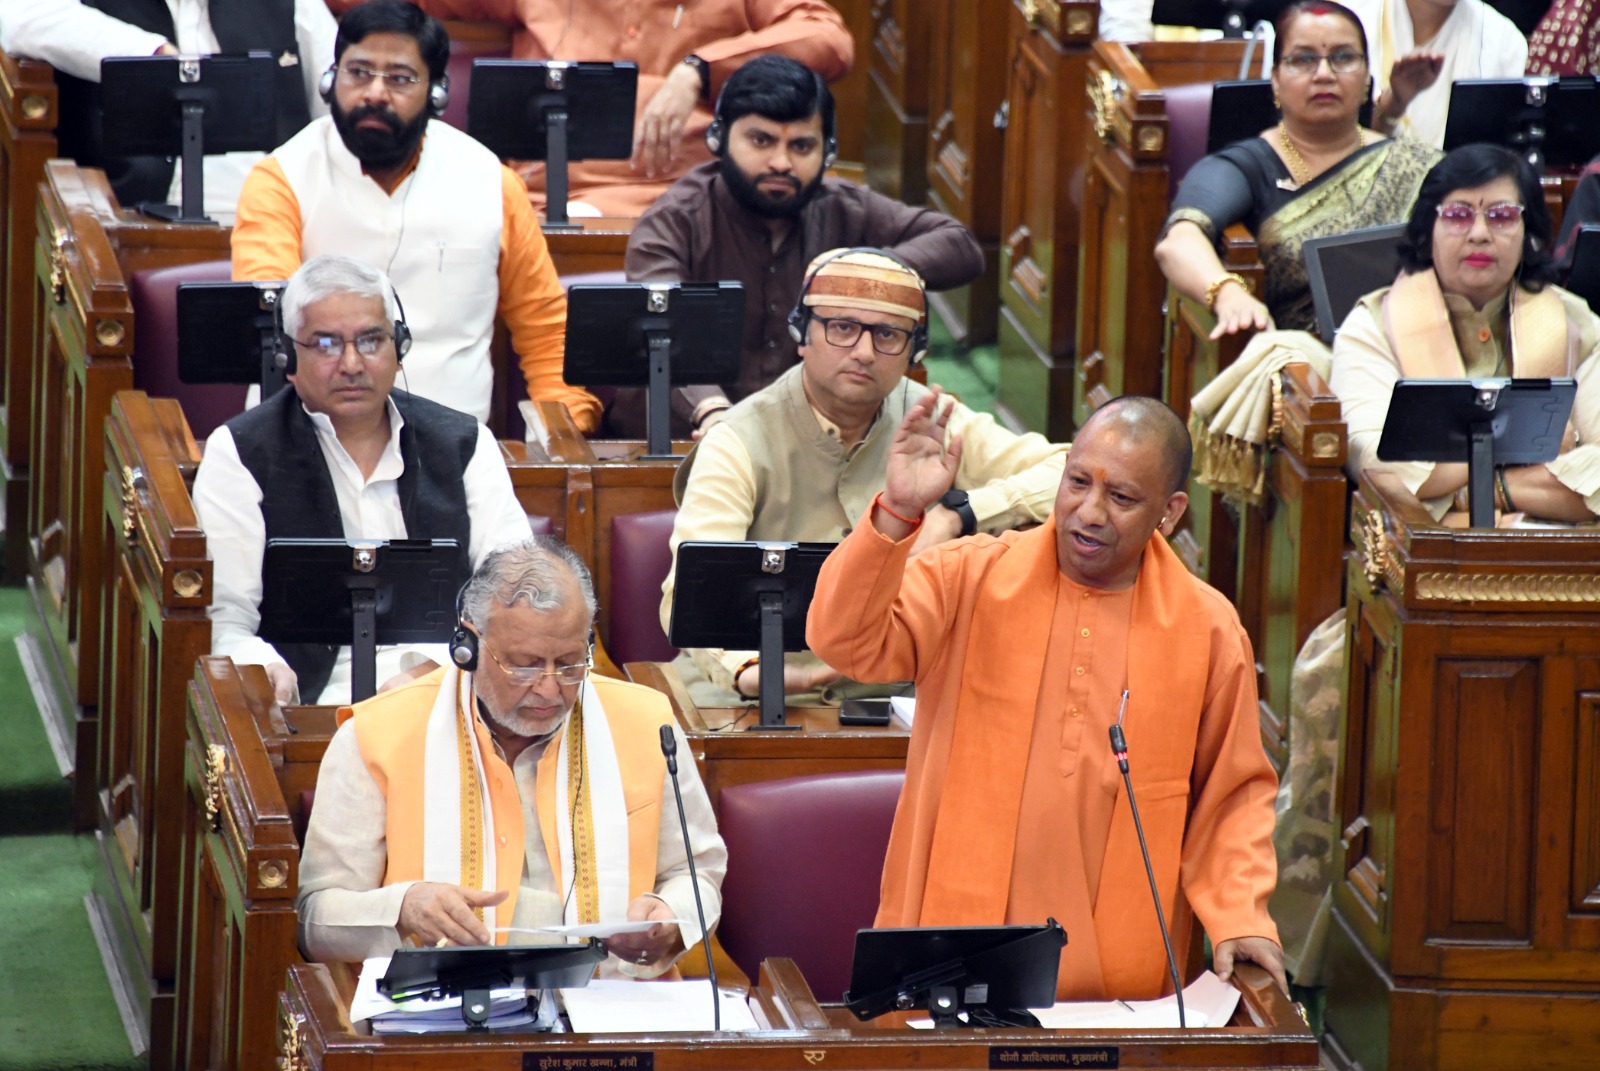 Women’s help desk and women beat formed in all police stations: CM Yogi